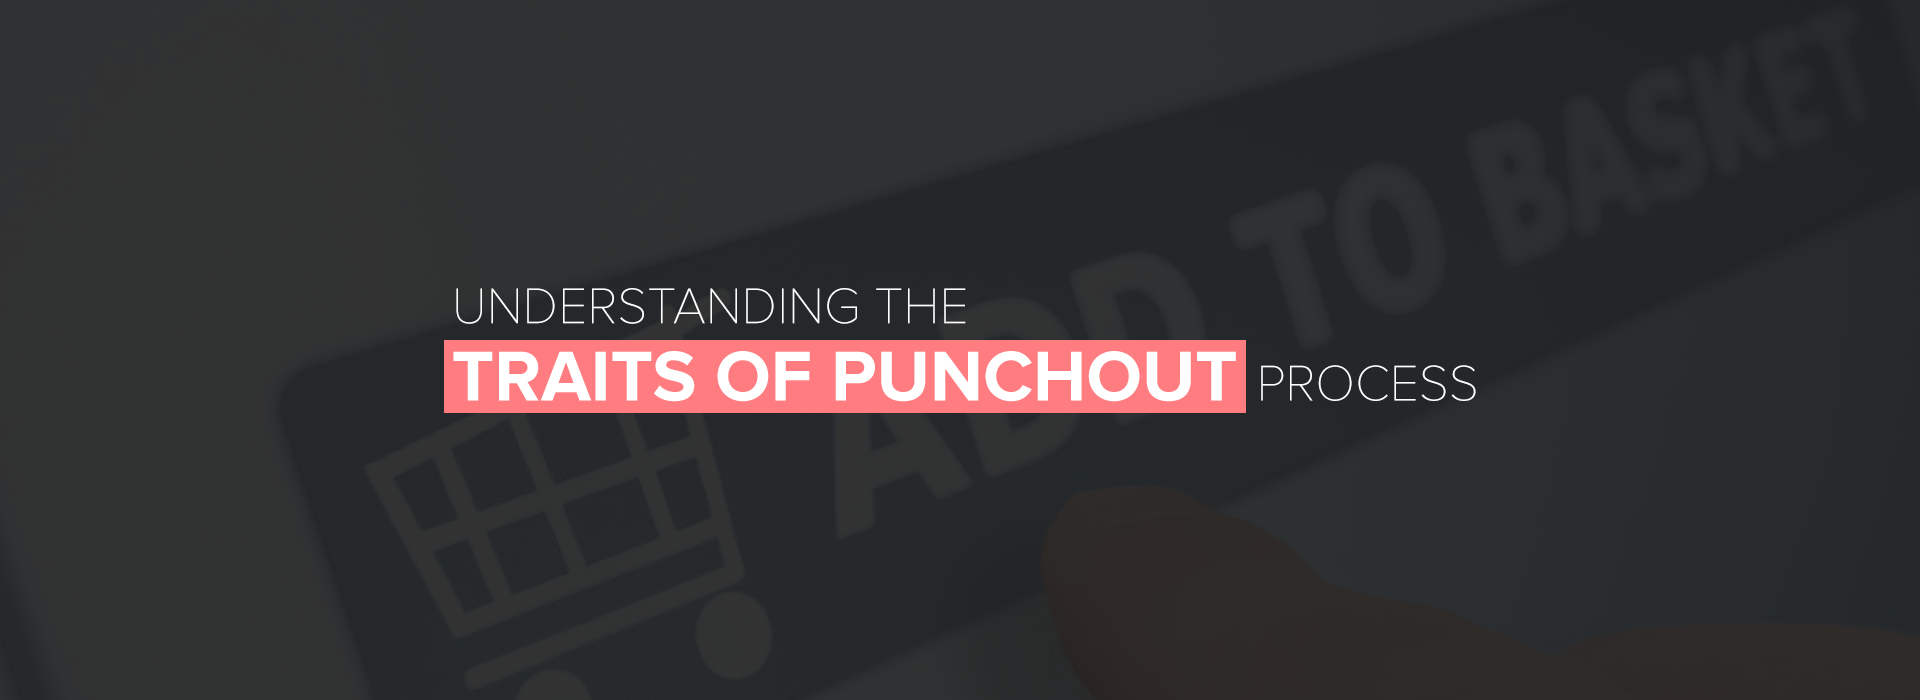 Understanding-the-traits-of-Punchout-Process-eCommfy